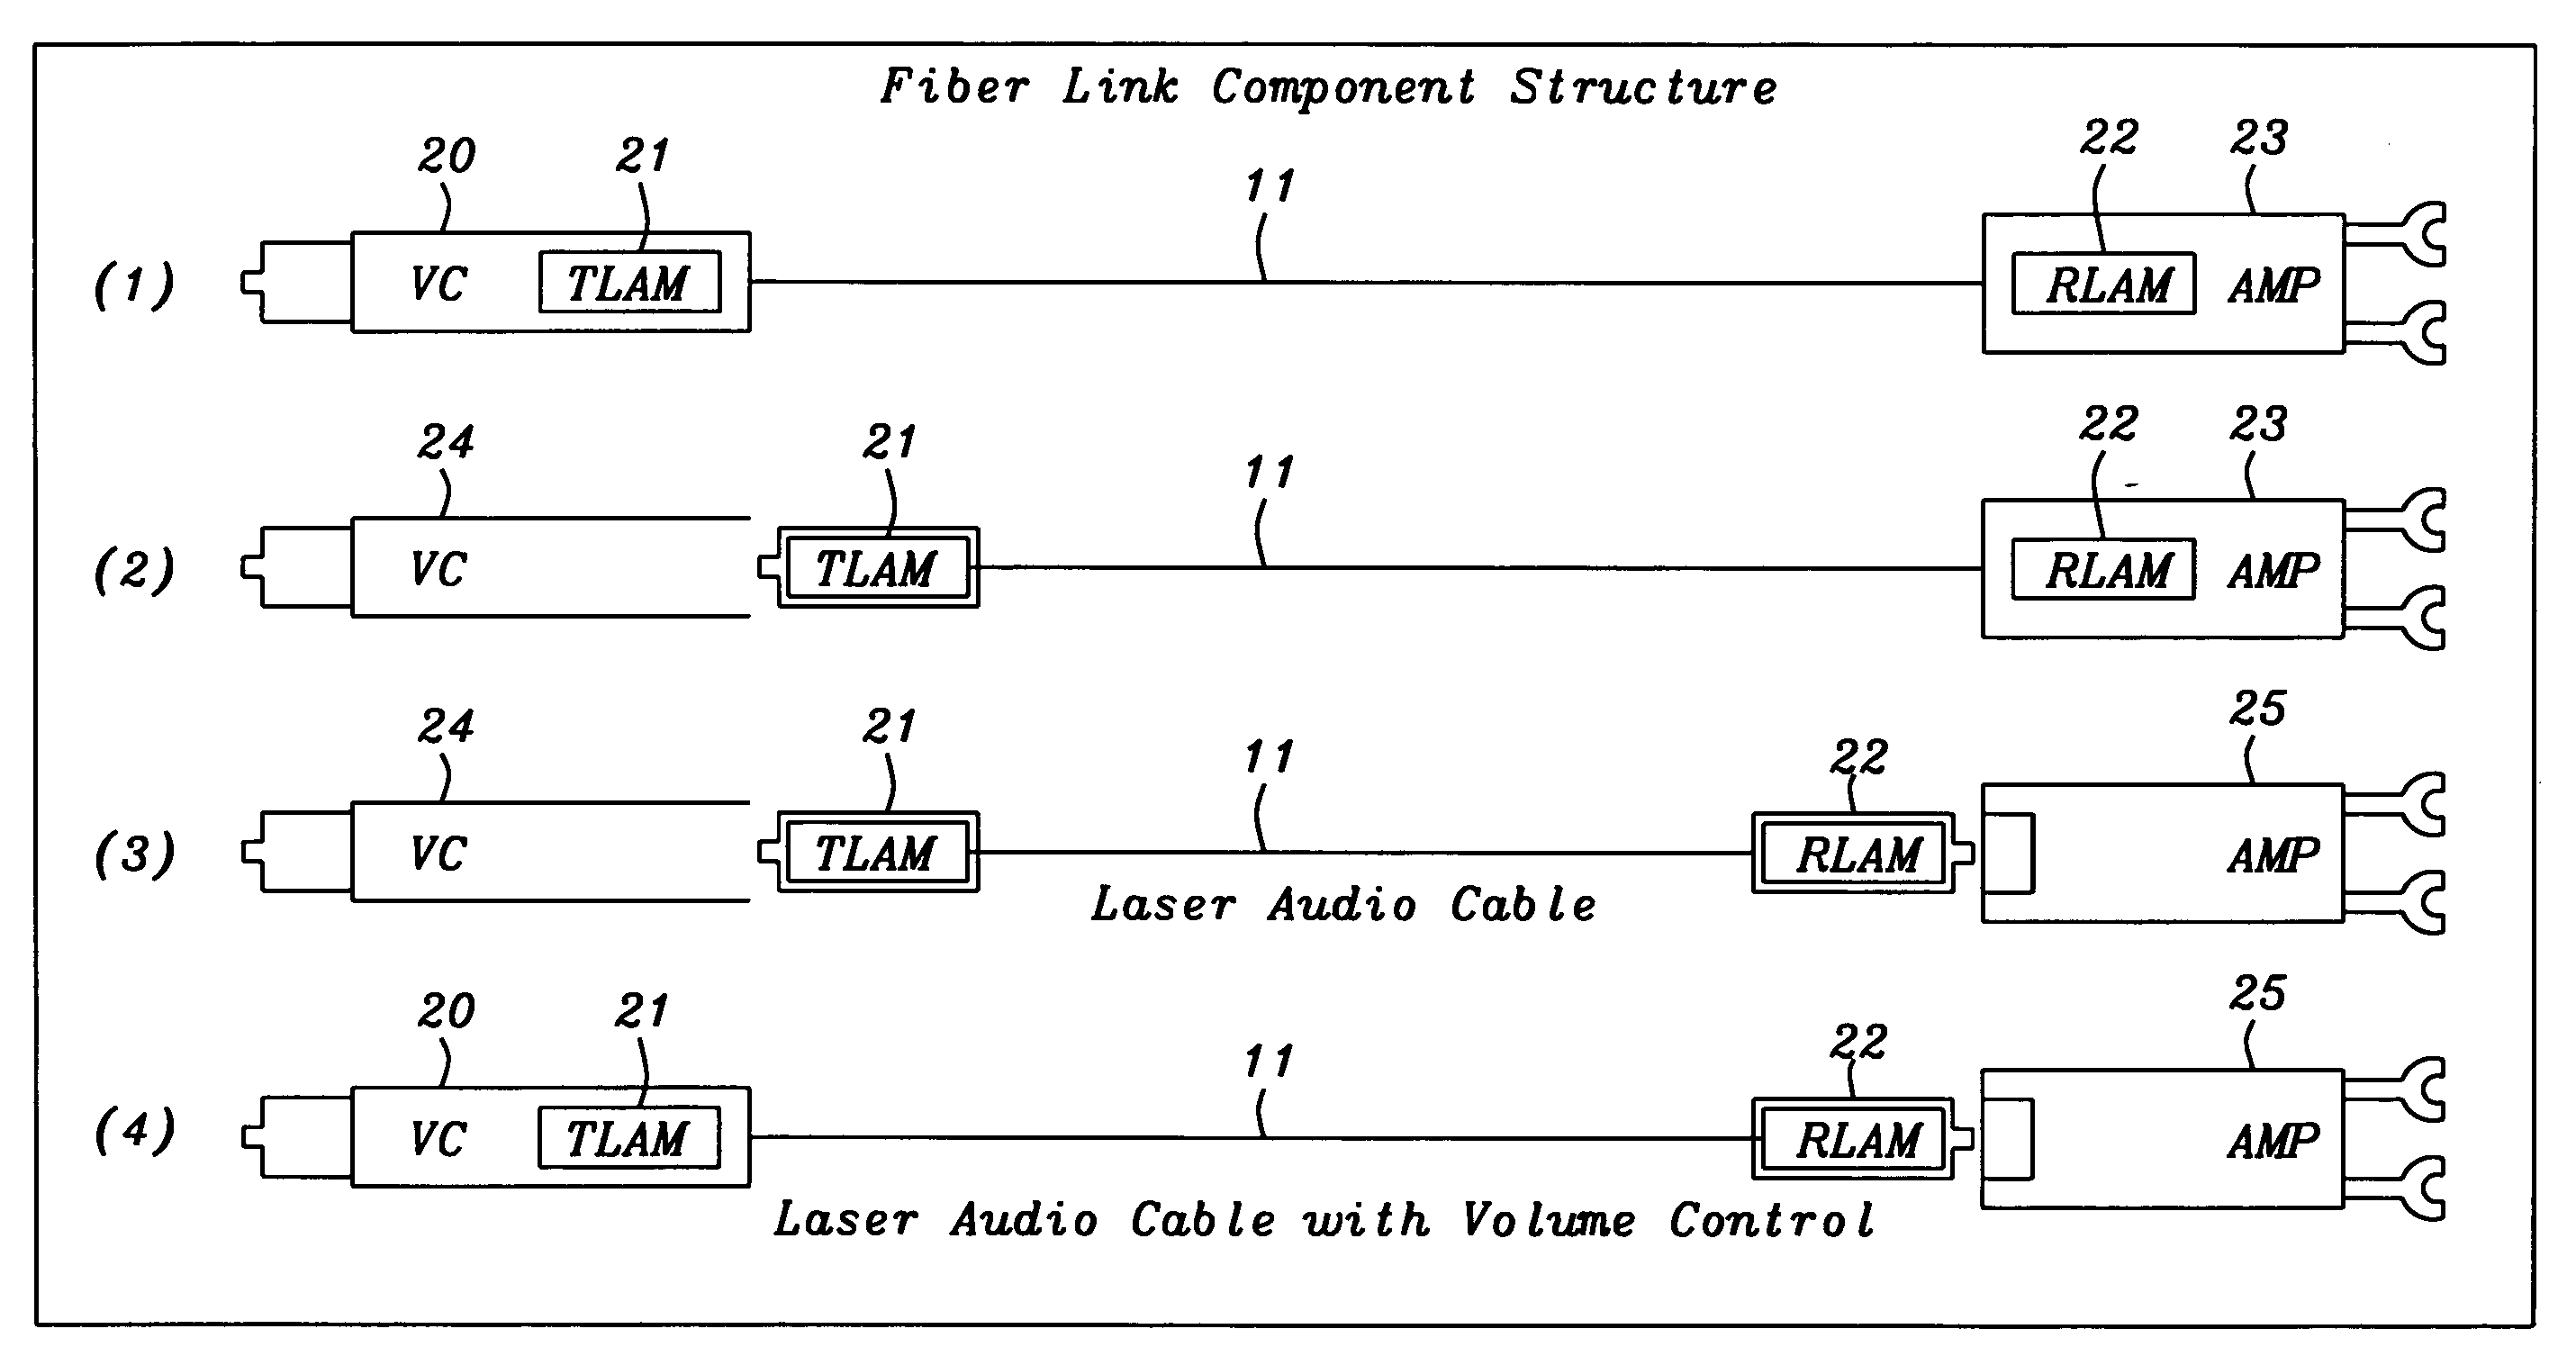 Photon audio amplifier and fiber link for audio systems